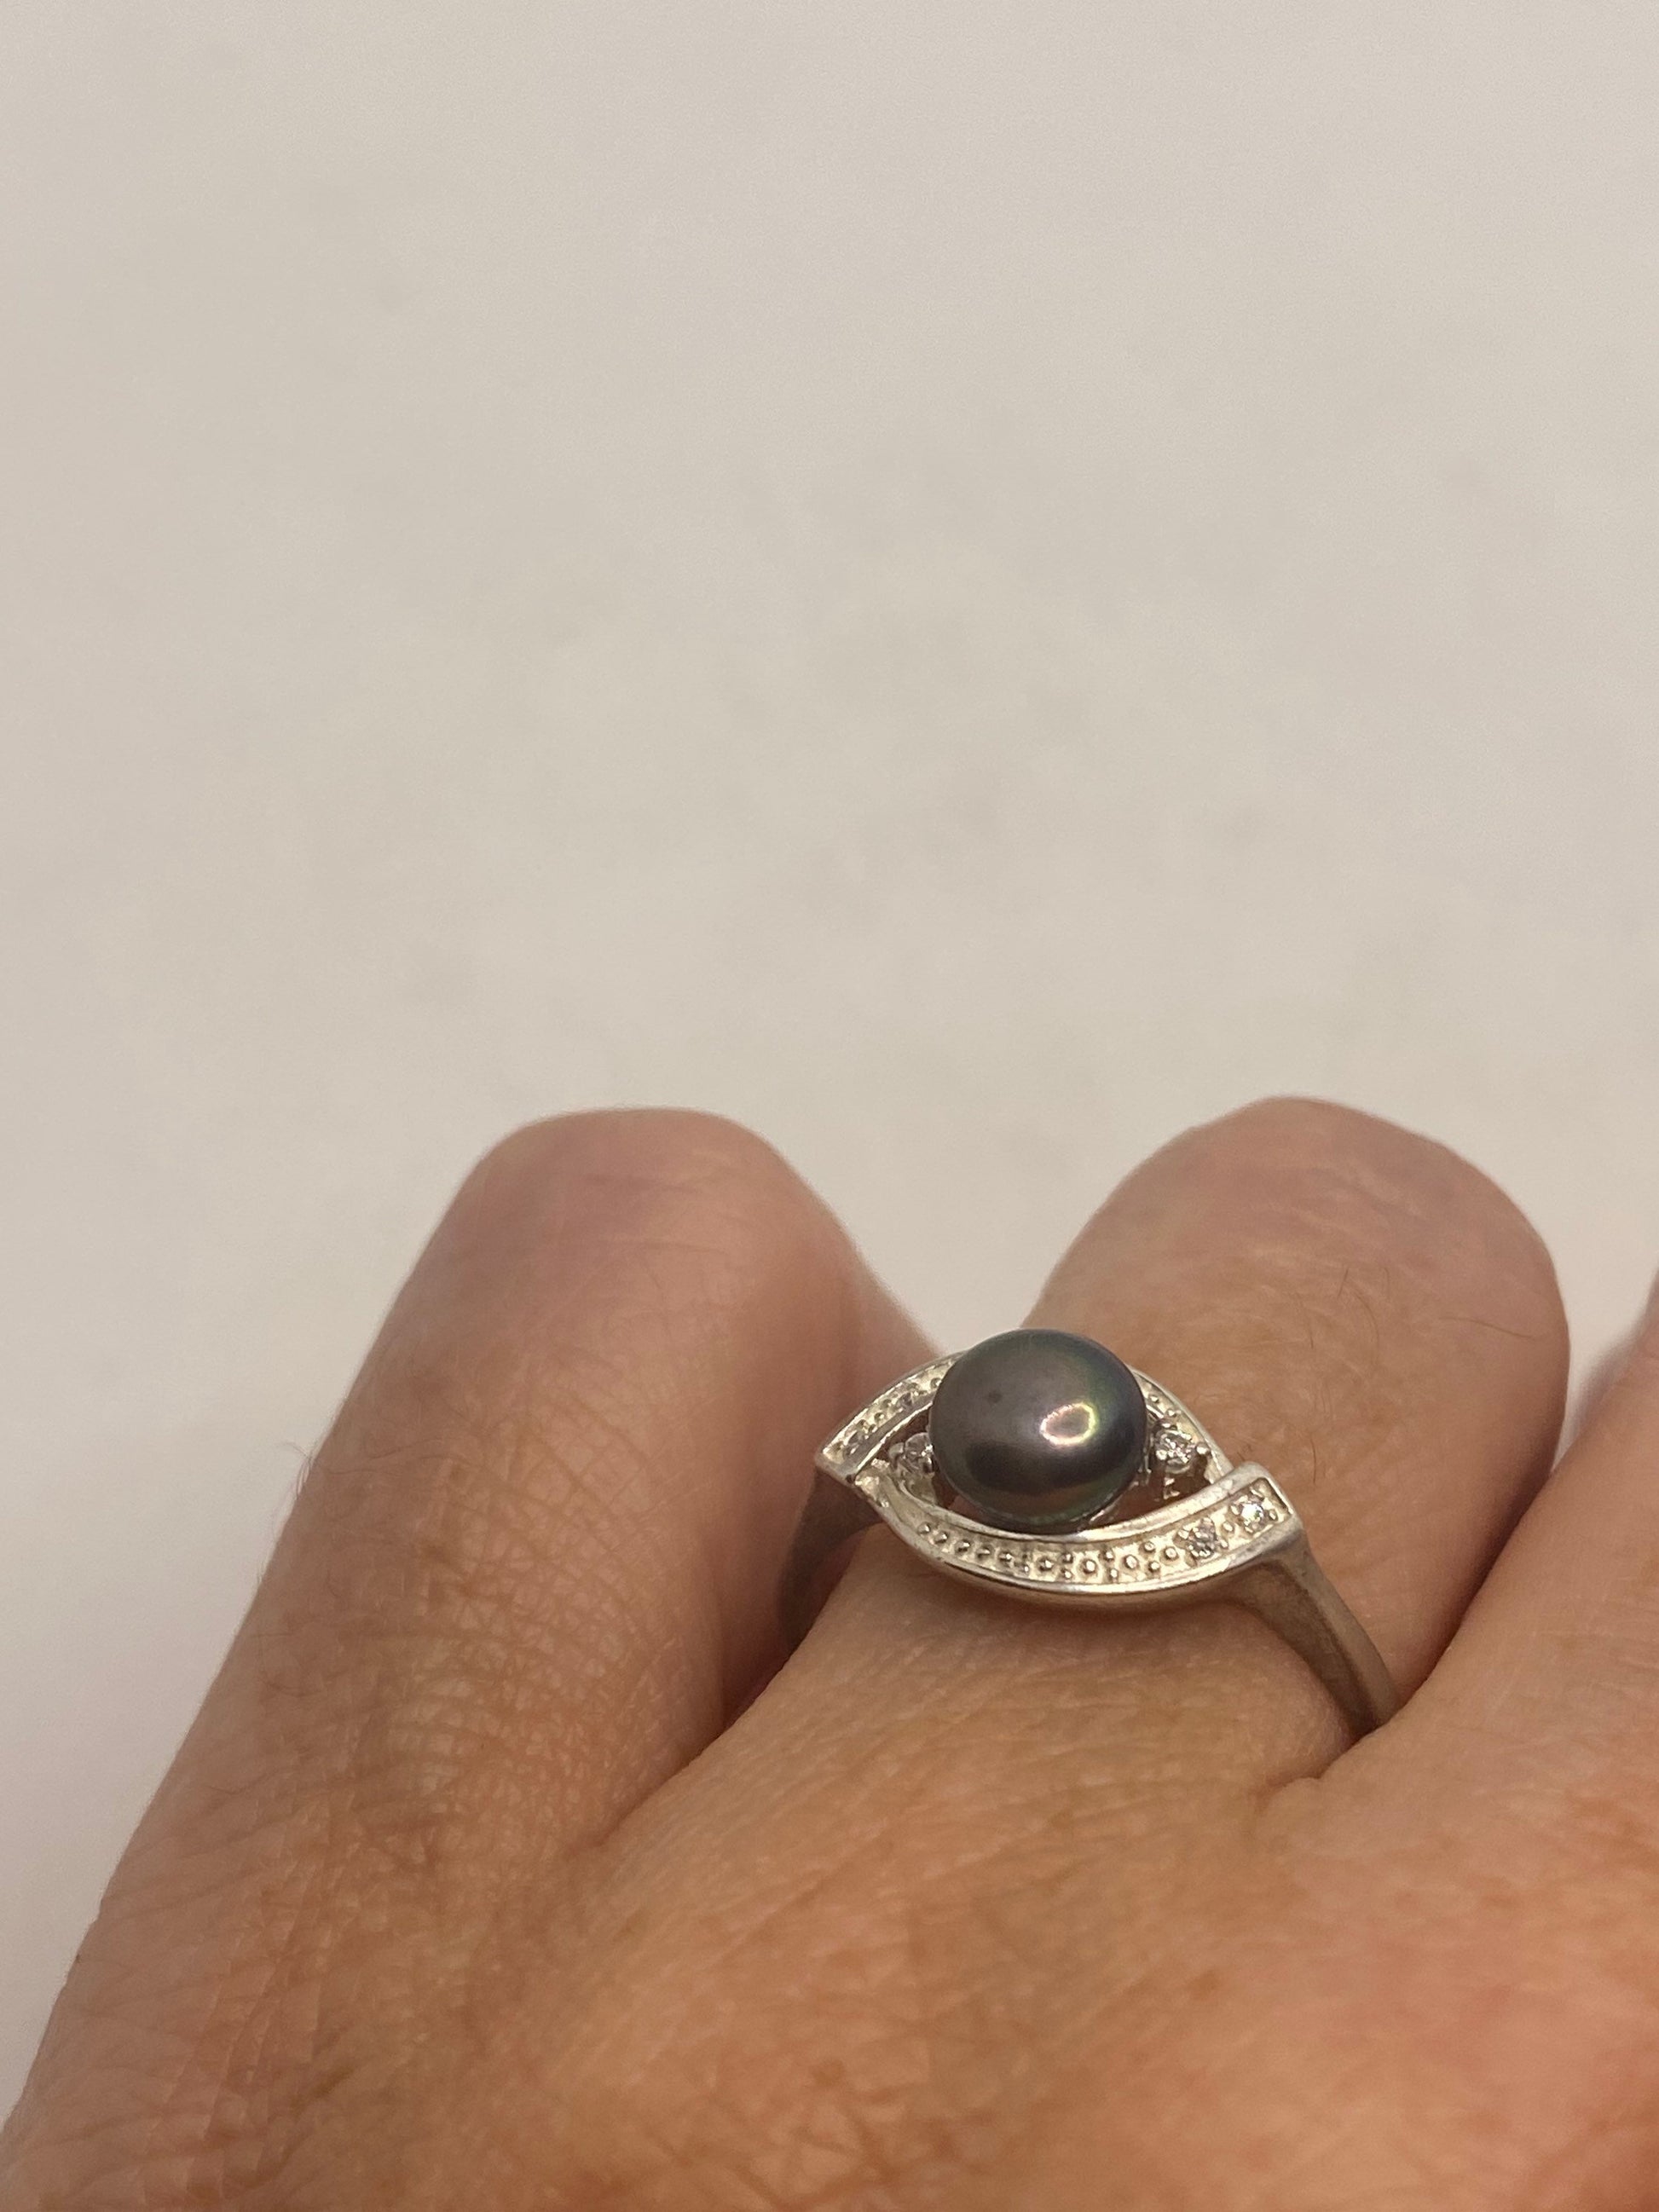 Vintage Black Pearl and Diamond Eye 925 Sterling Silver Cocktail Ring Size 8